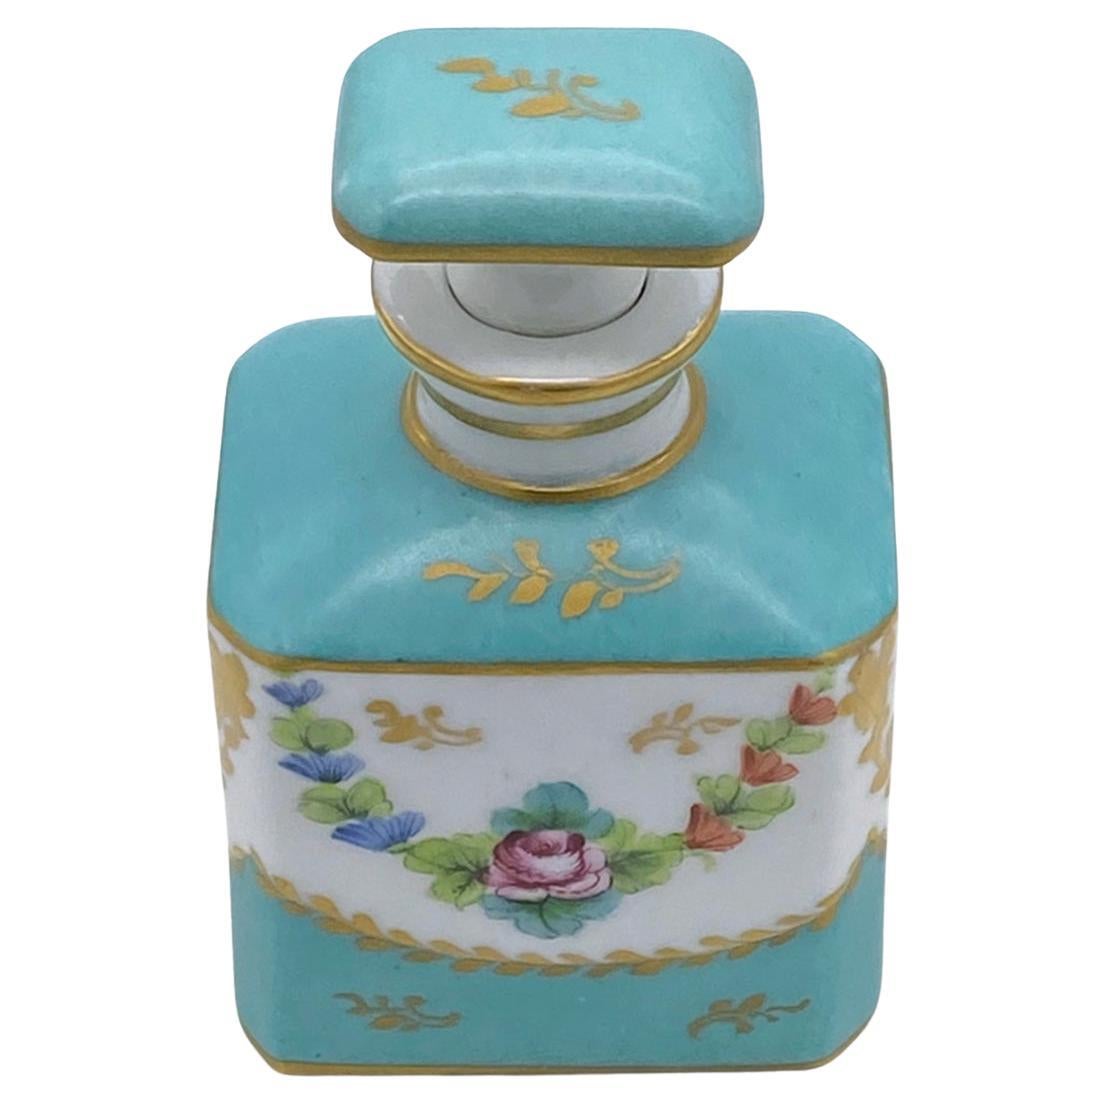 This is a Limoges hand decorated perfume bottle with stopper. This turquoise blue on white background with gold strokes bottle is also decorated with roses with garlands on front and back. This French countury style porcelain bottle would be a